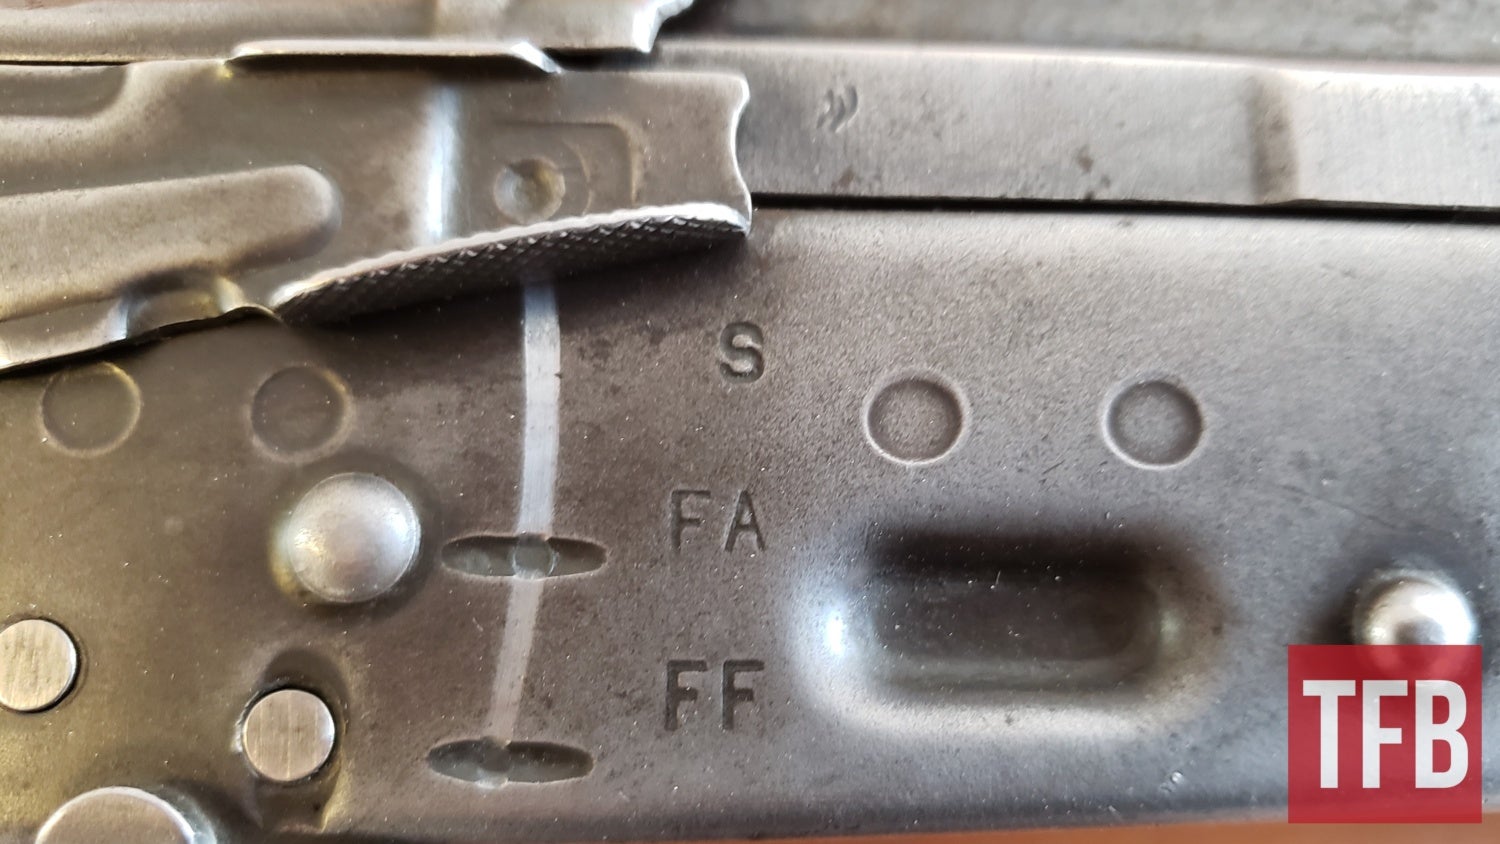 Markings on the domestic version of a Romanian AK